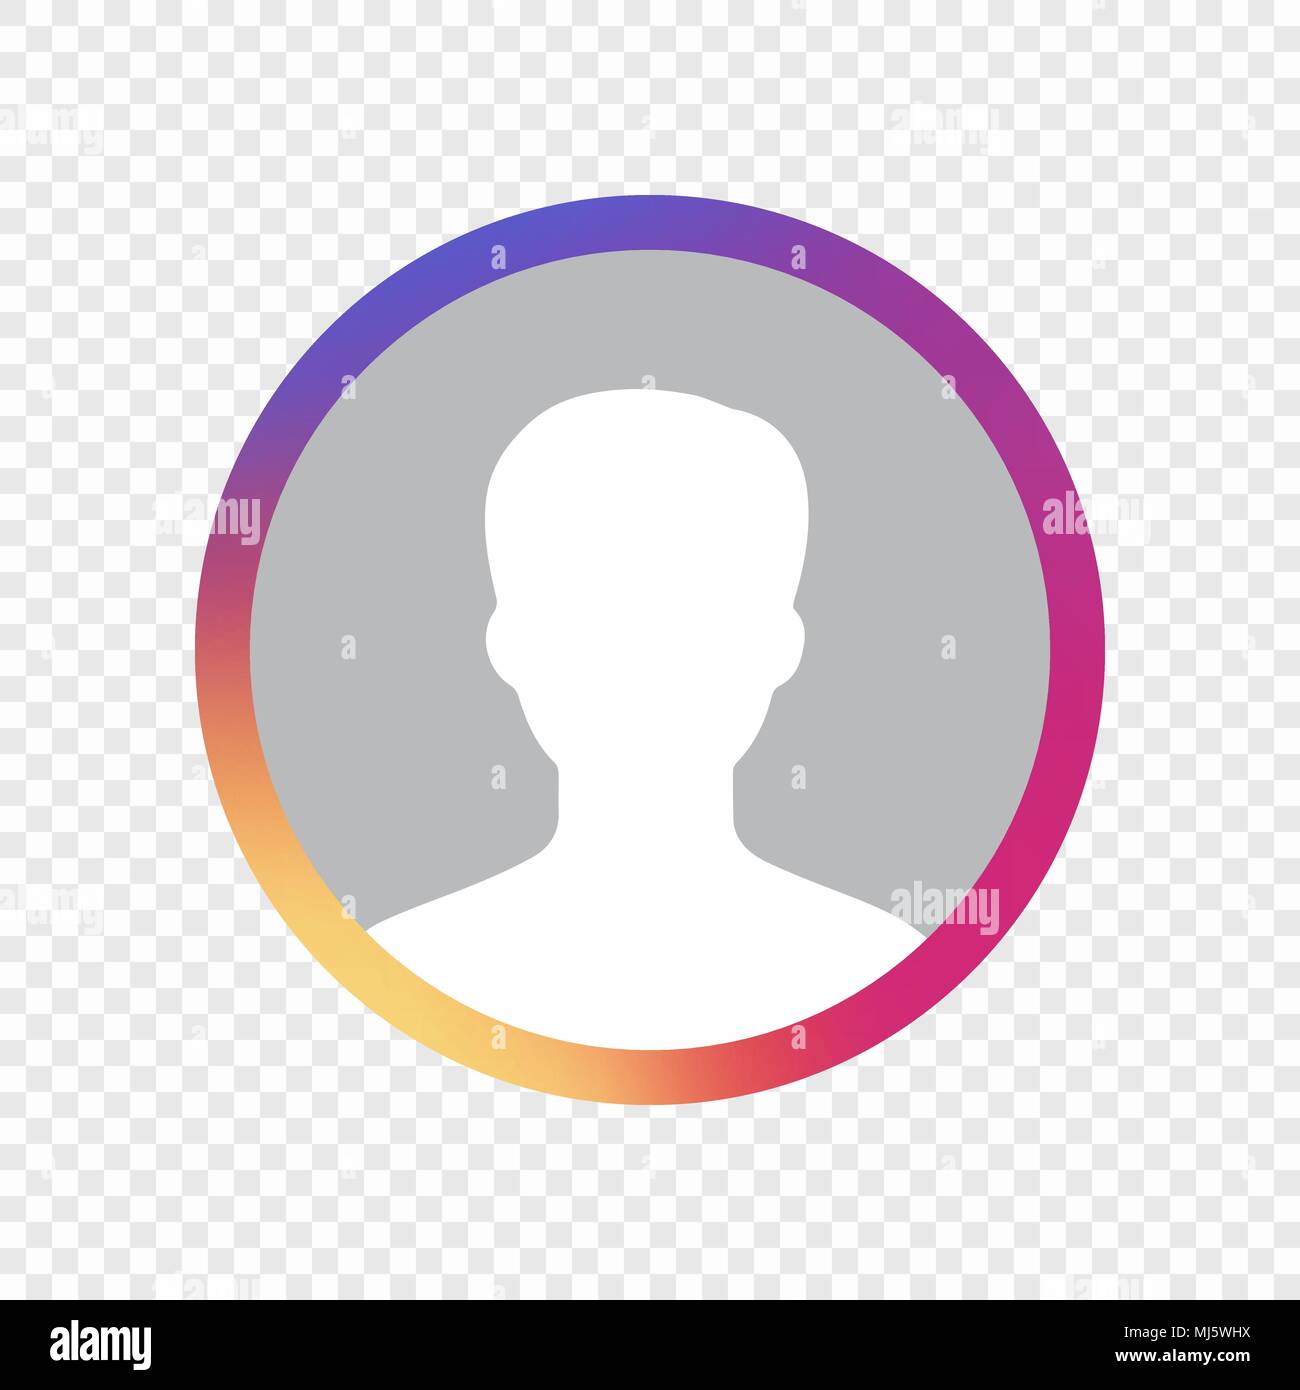 Social Media Avatar Network Connection Concept People In A Social Network  Royalty Free SVG Cliparts Vectors And Stock Illustration Image 32458128